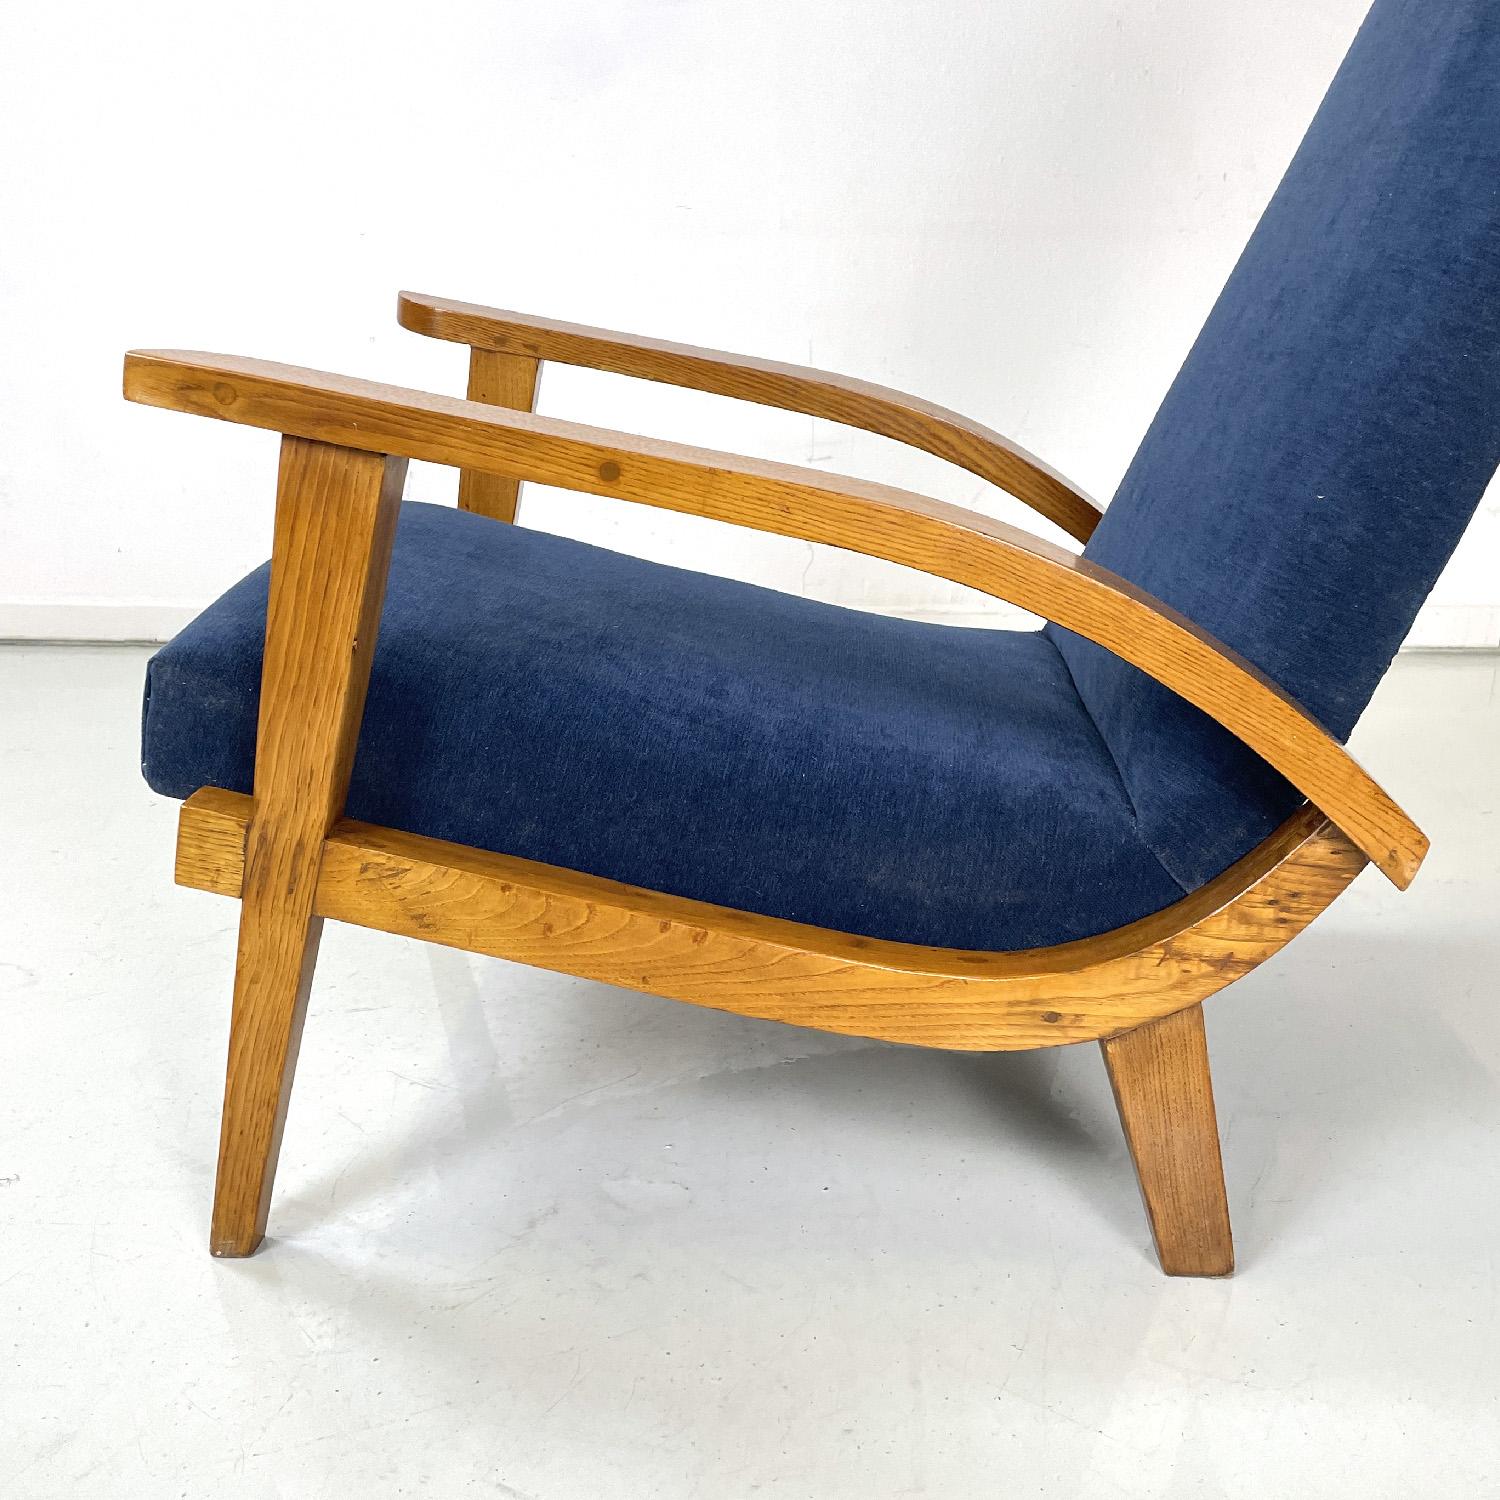 Italian mid-century modern wood and blue fabric armchairs, 1950s For Sale 1